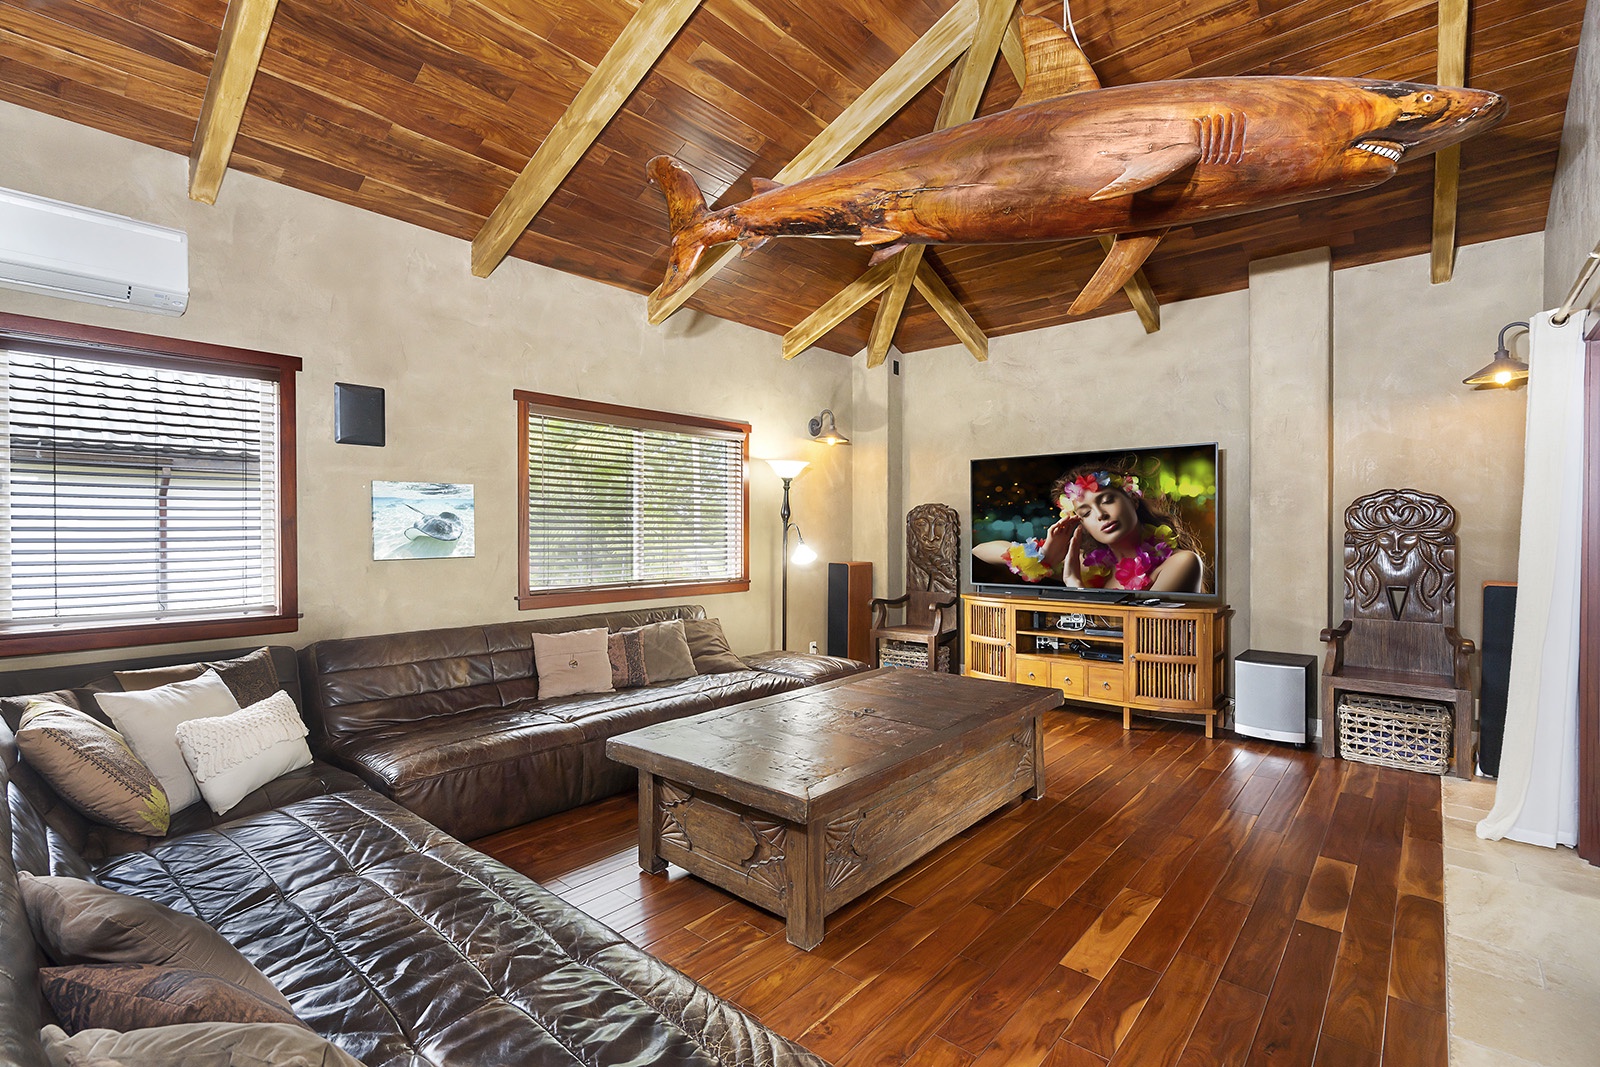 Kailua Kona Vacation Rentals, Mermaid Cove - Air conditioned media room, with 80in smart TV